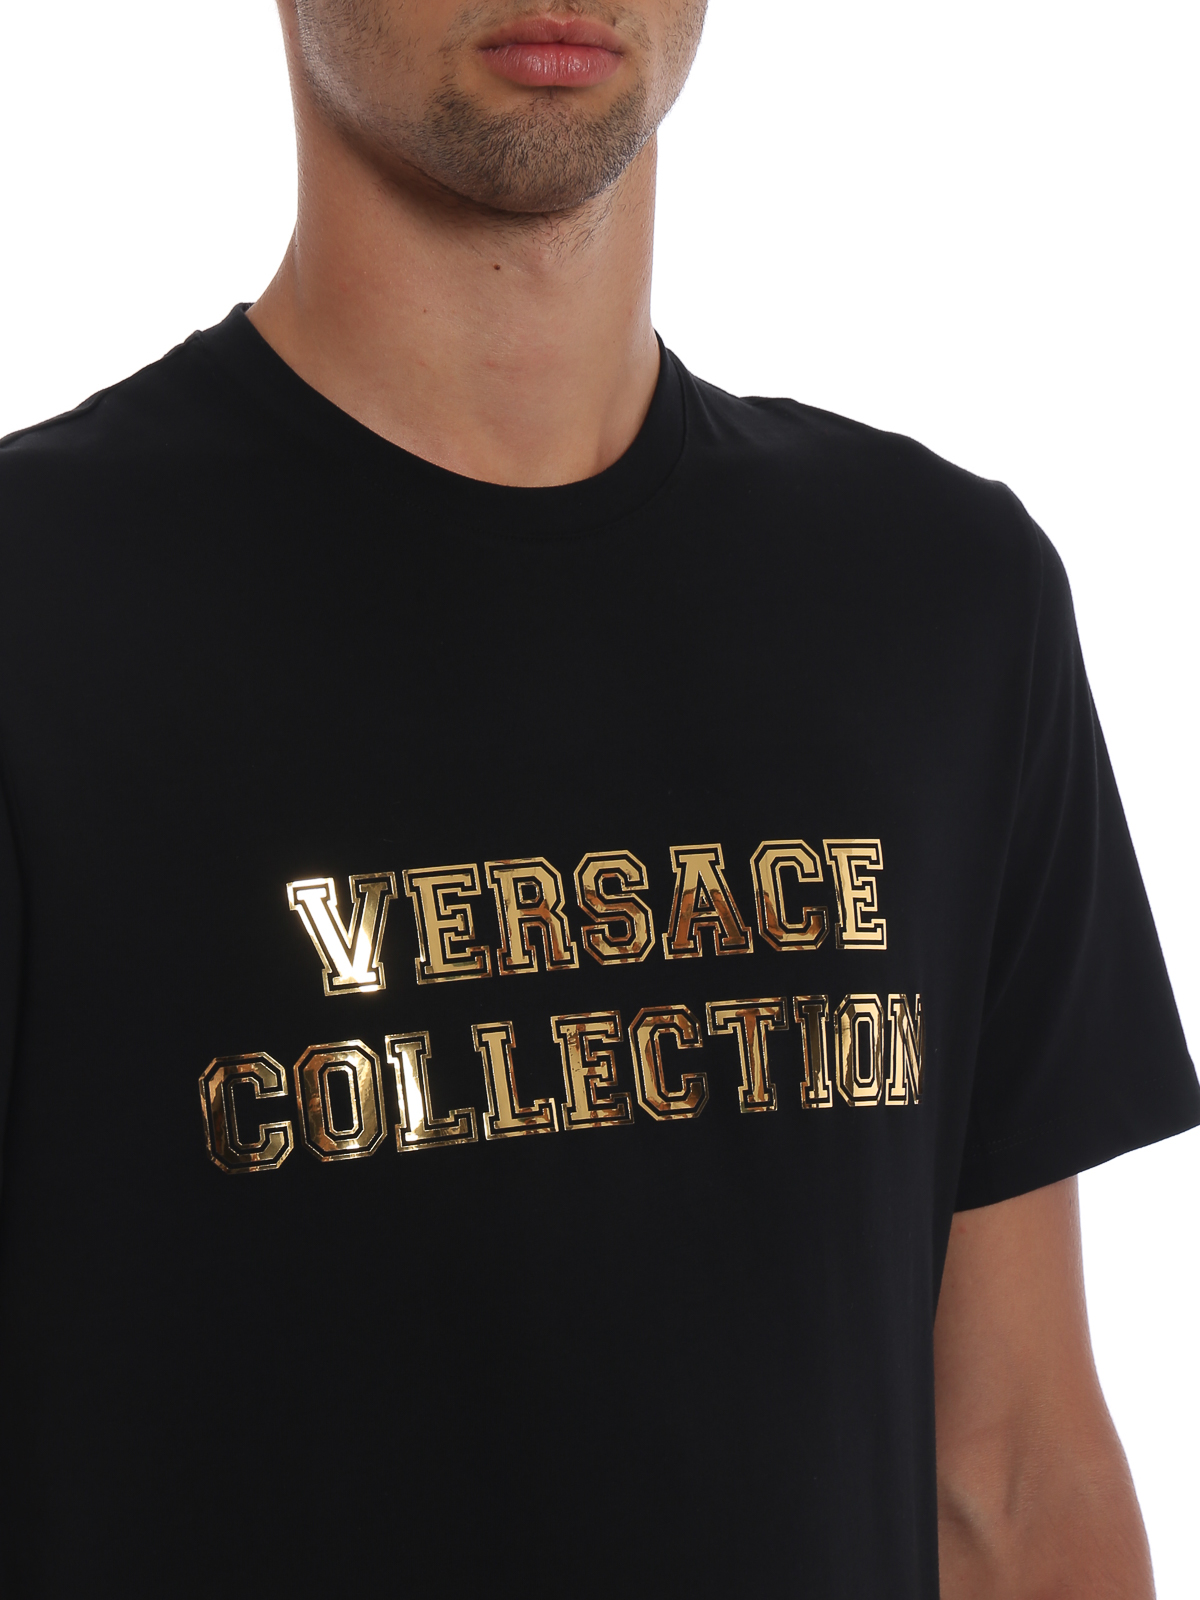 VERSACE COLLECTION Tシャツ - Tシャツ/カットソー(半袖/袖なし)